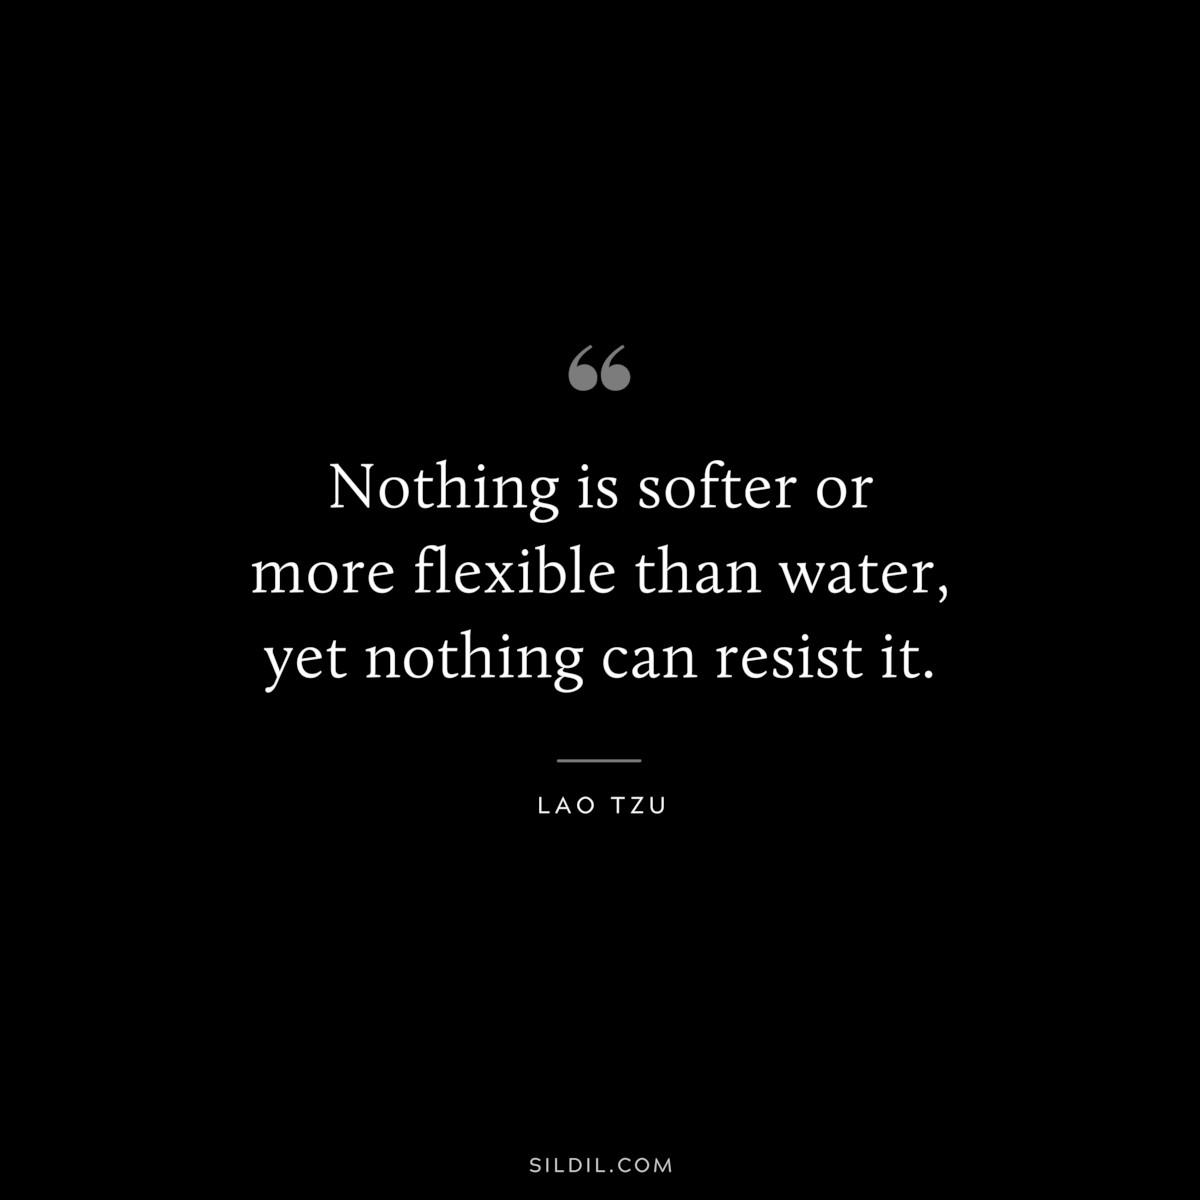 Nothing is softer or more flexible than water, yet nothing can resist it. ― Lao Tzu